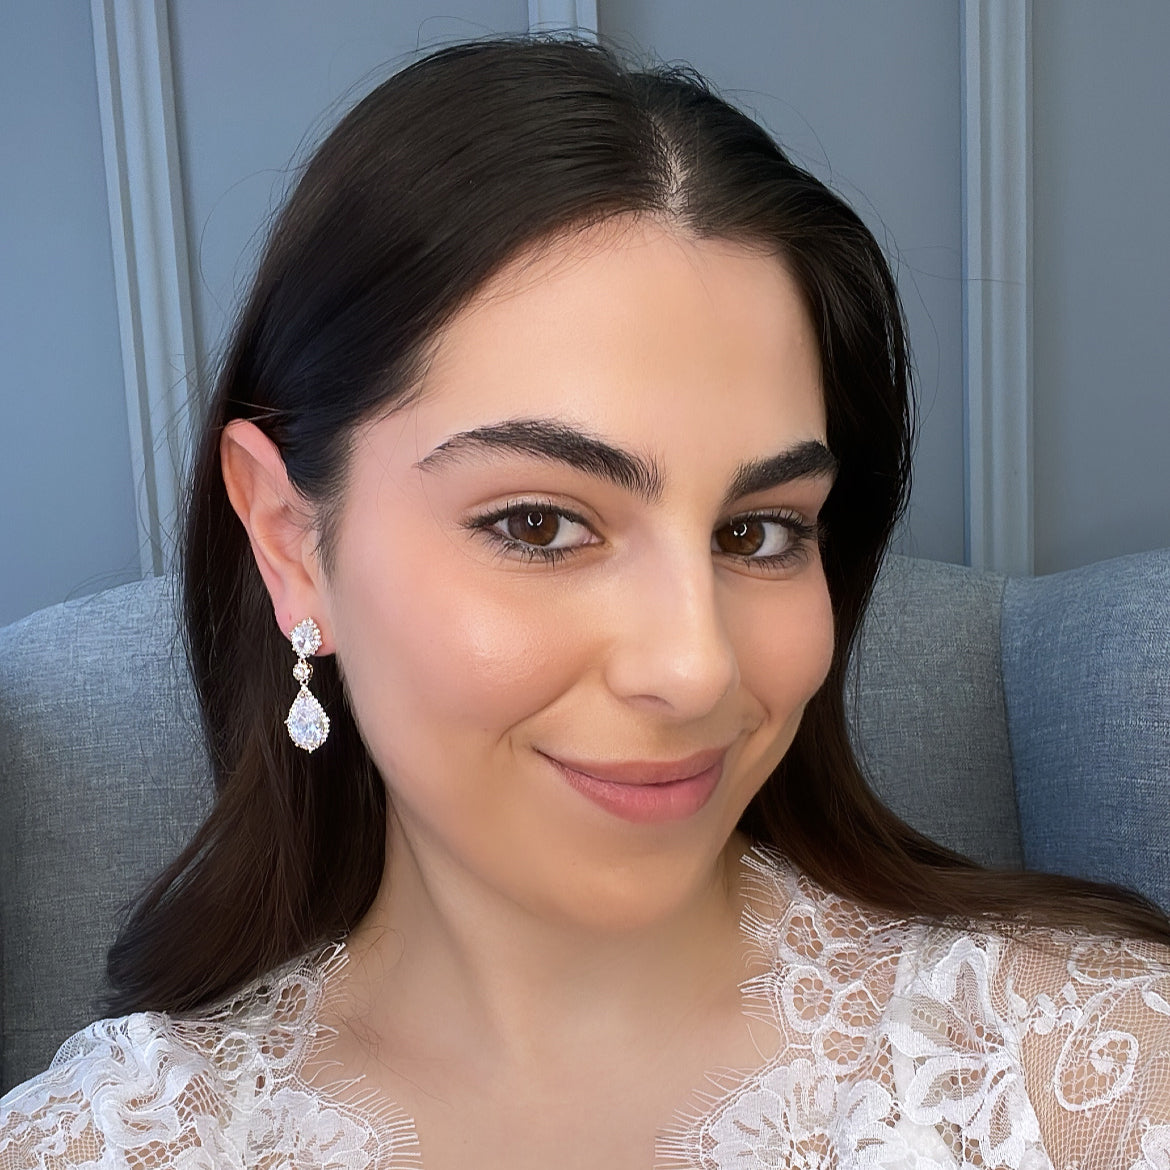 Bridal Earrings: How to Find the Right Pair to Match Your Wedding Dress